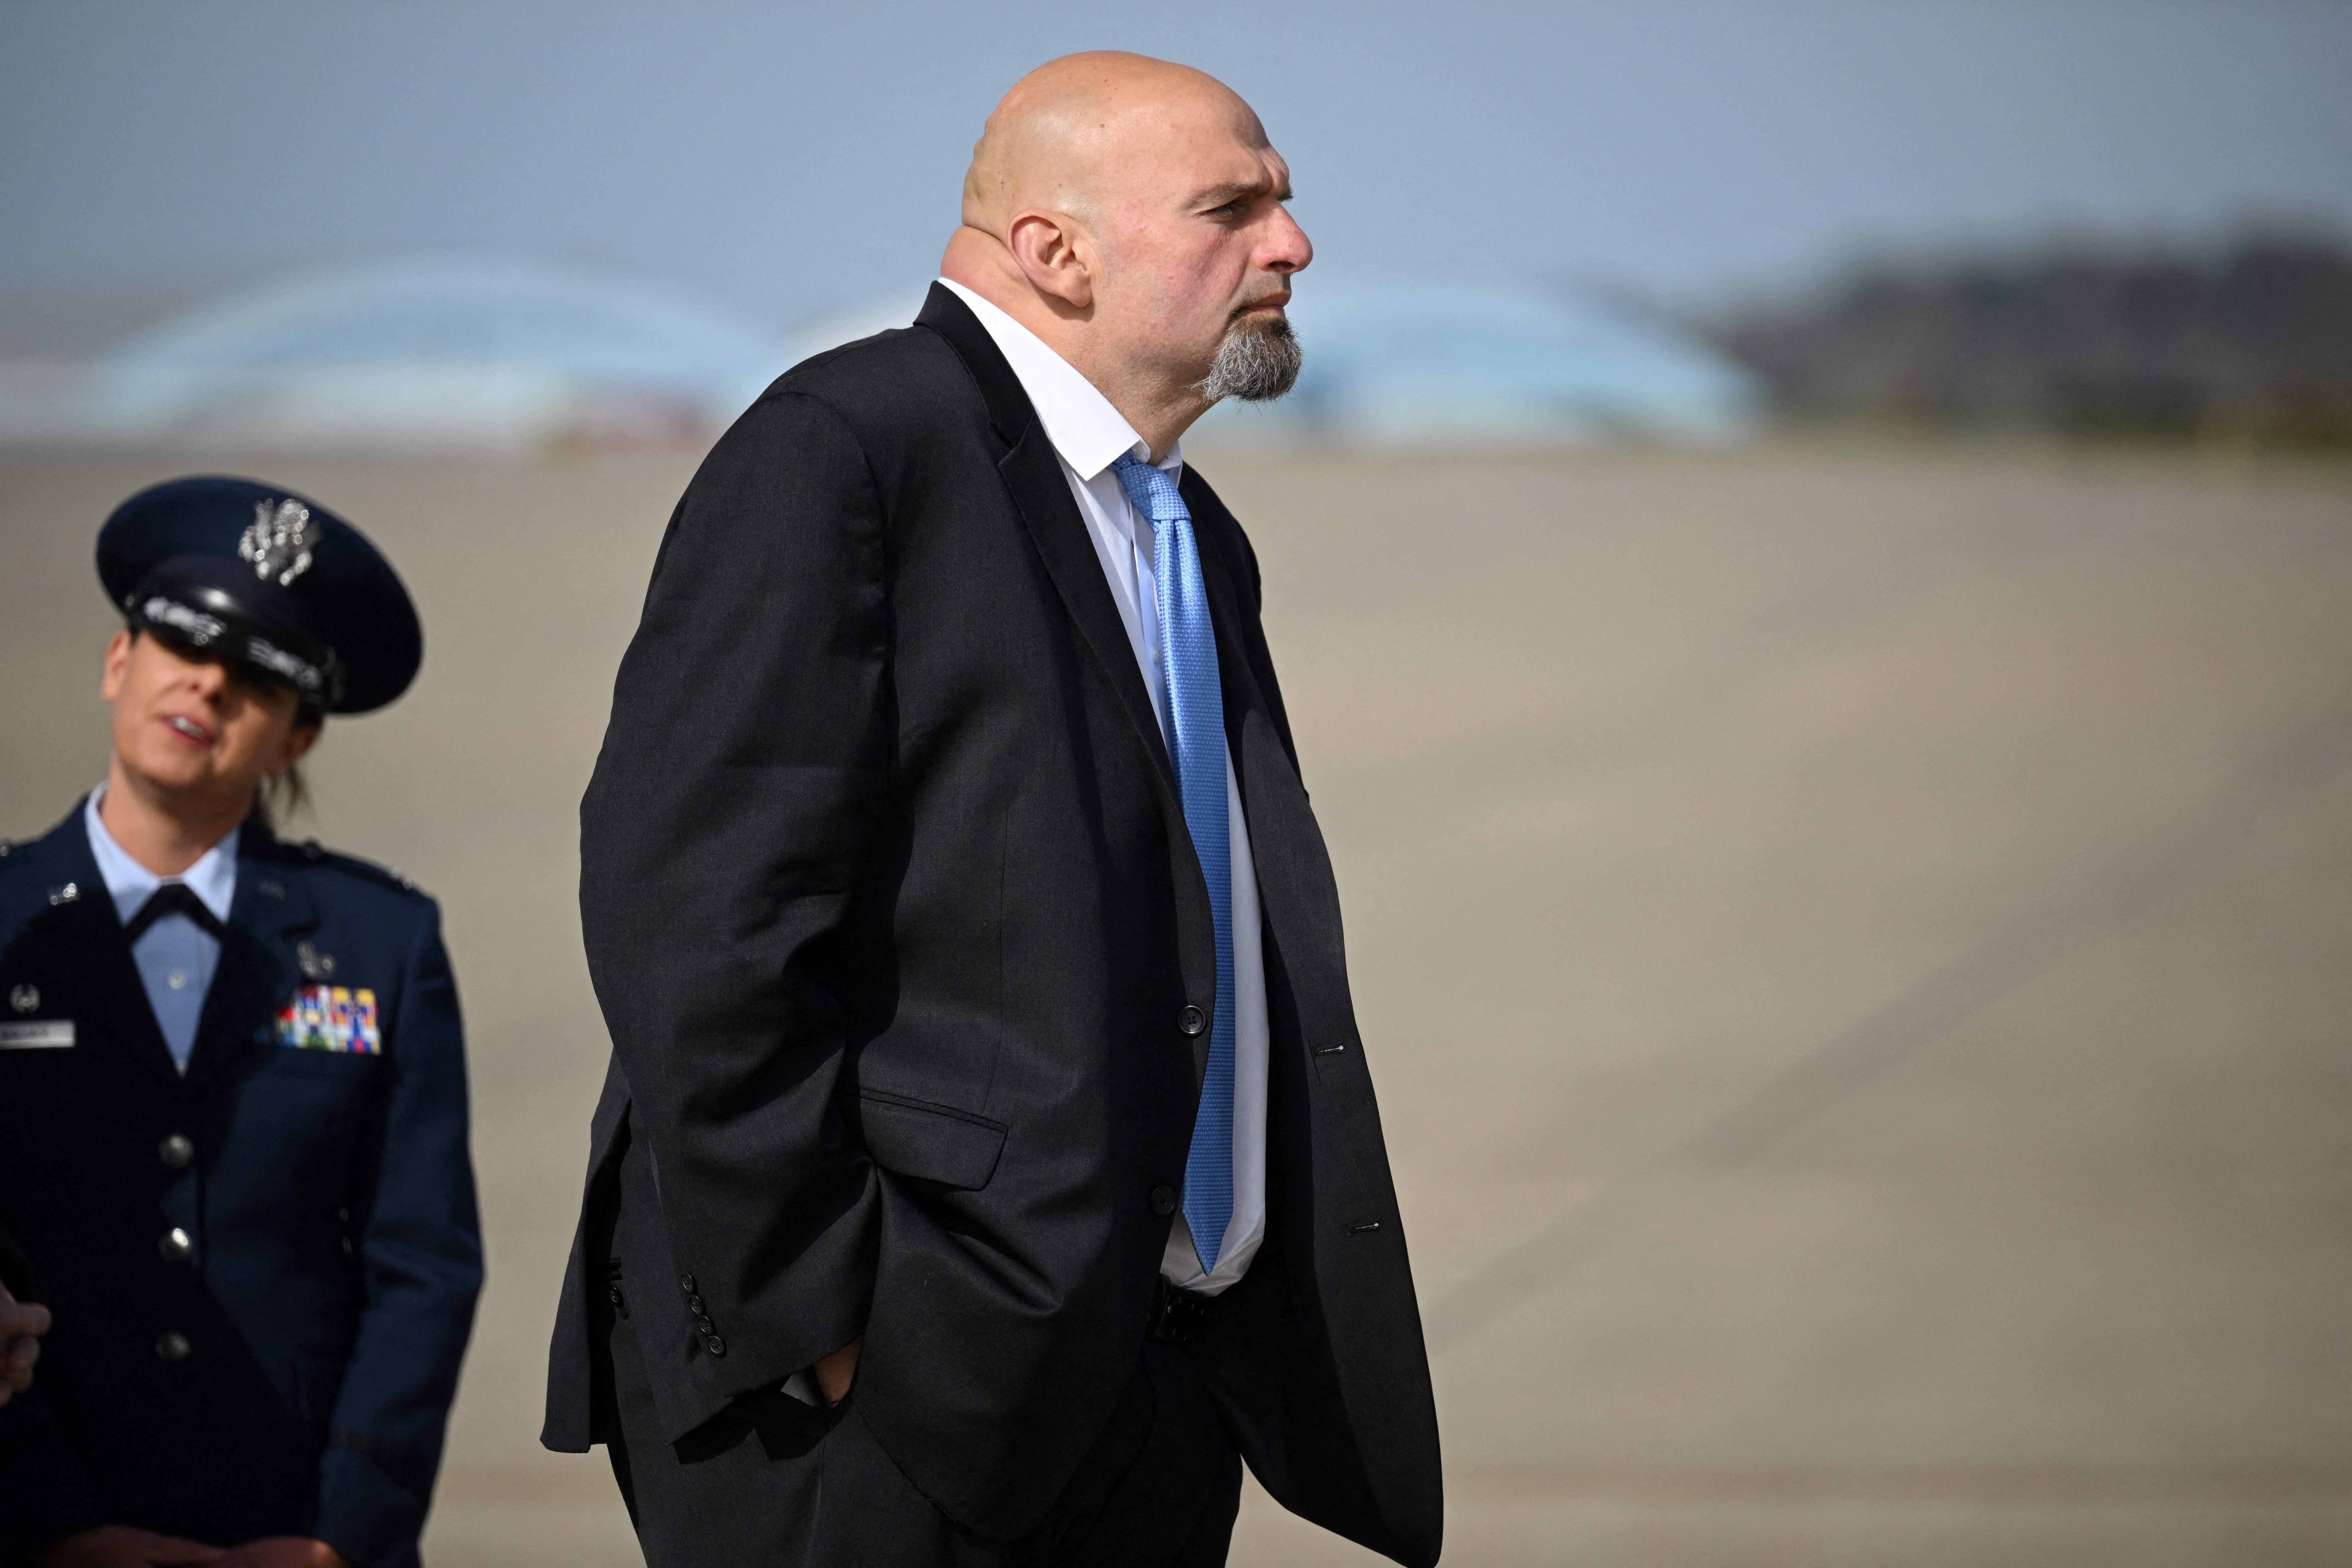 Pennsylvania Lt. Gov. and Democratic senatorial candidate John Fetterman waits for US President Joe Biden to step off Air Force One at Pittsburgh International Airport in Pittsburgh, Pennsylvania, on October 20, 2022. (Photo by MANDEL NGAN / AFP) (Photo by MANDEL NGAN/AFP via Getty Images)